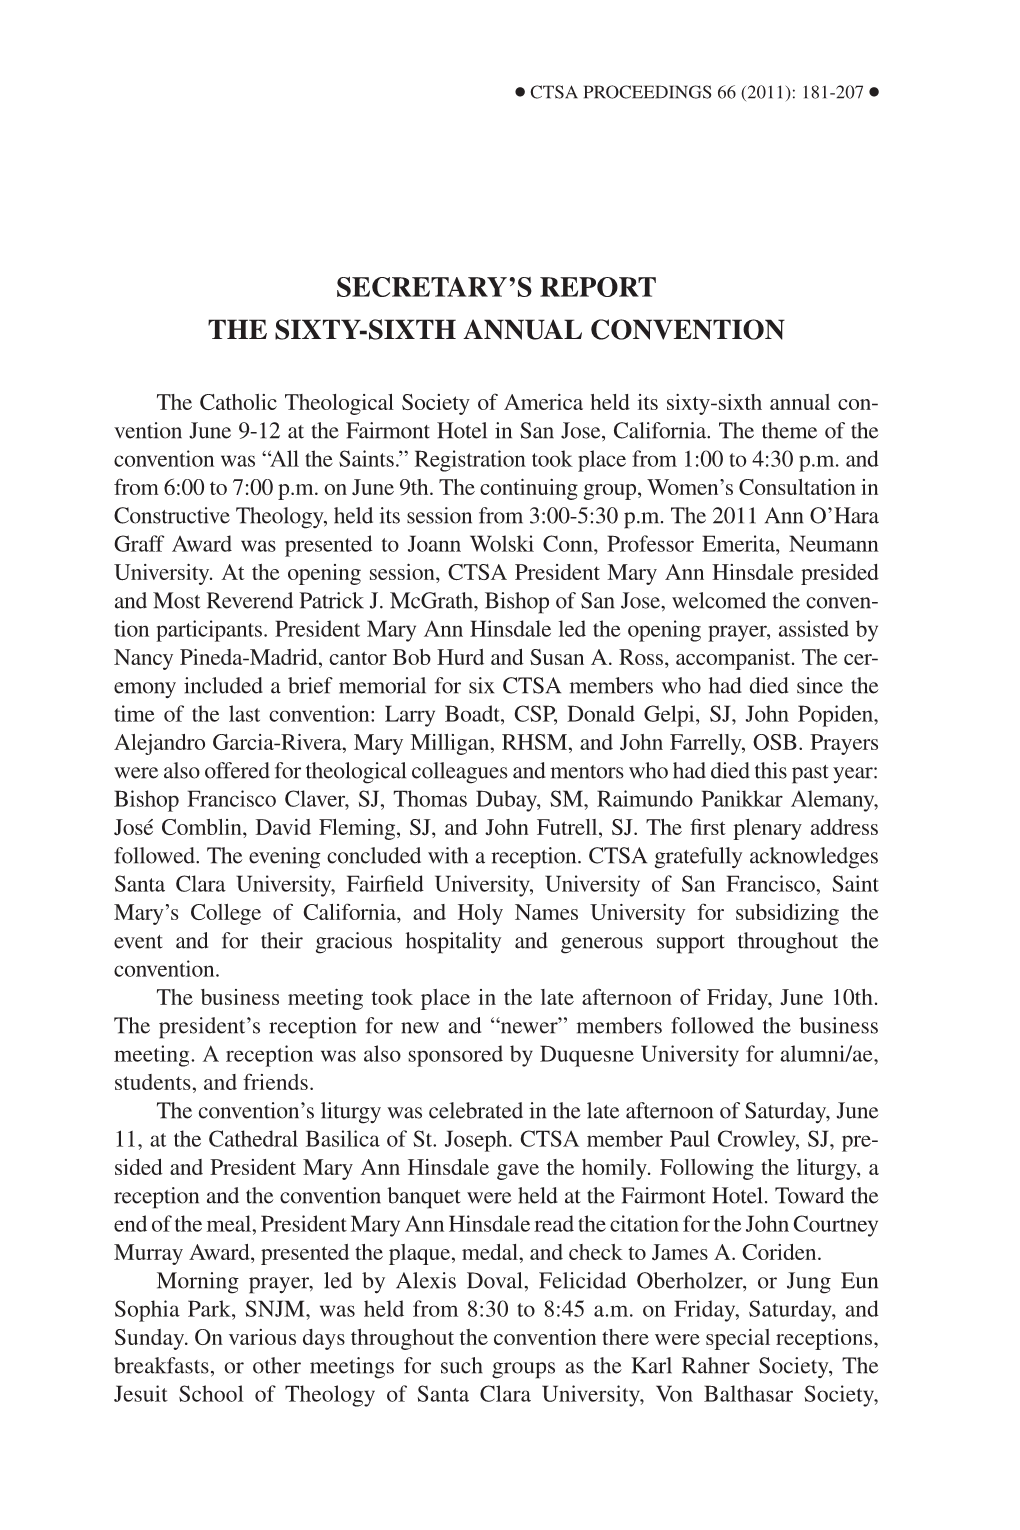 Secretary's Report the Sixty-Sixth Annual